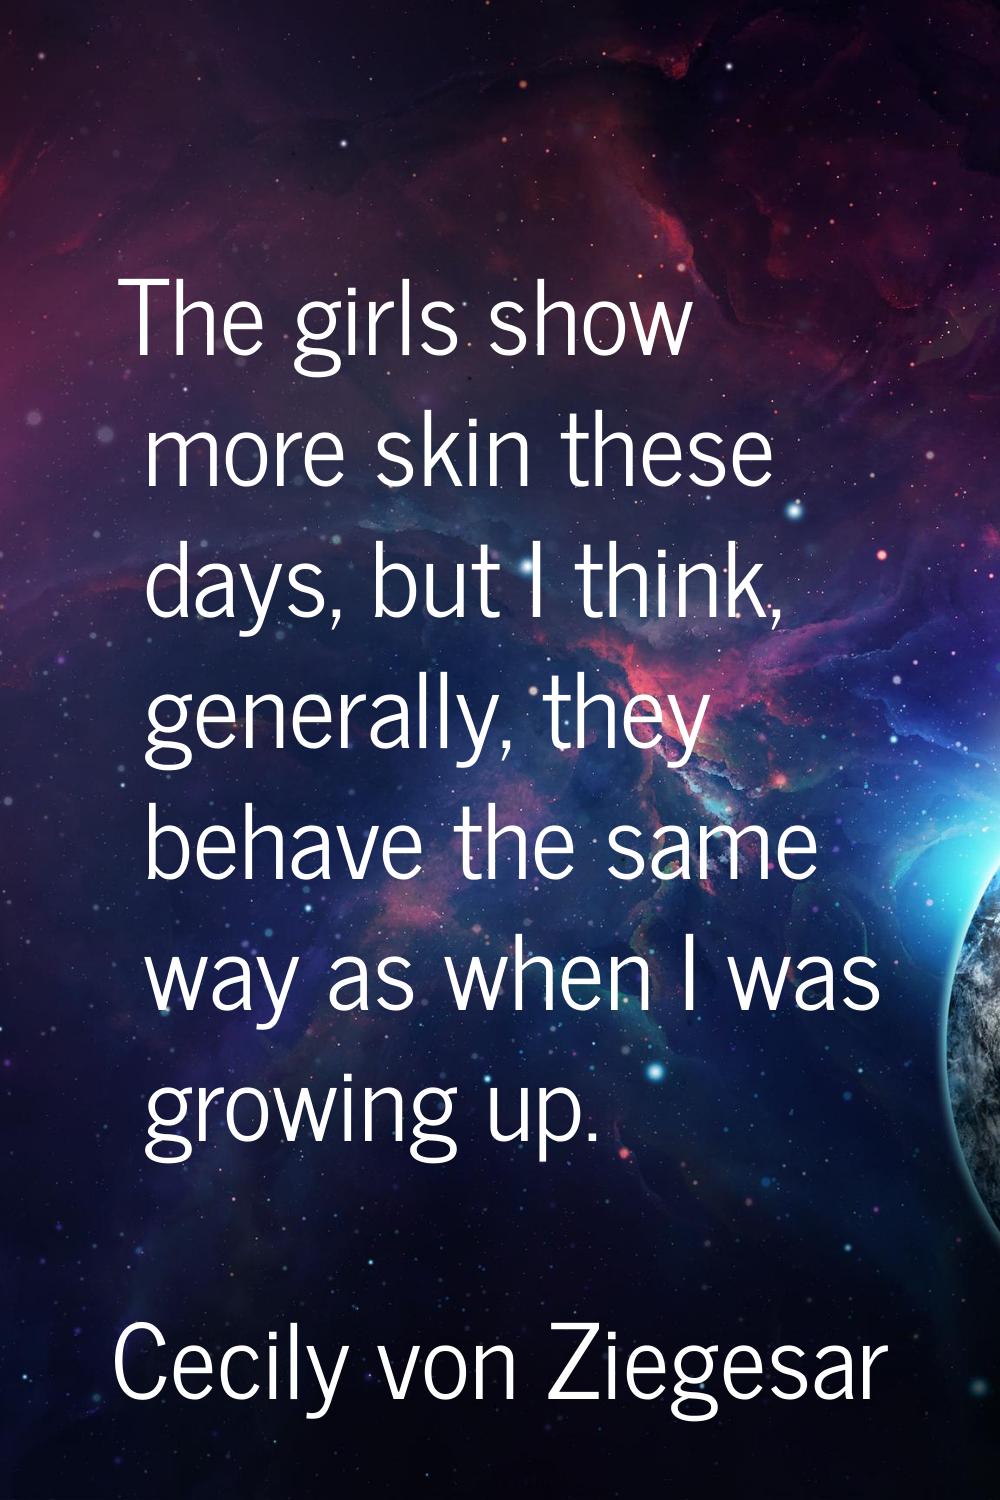 The girls show more skin these days, but I think, generally, they behave the same way as when I was